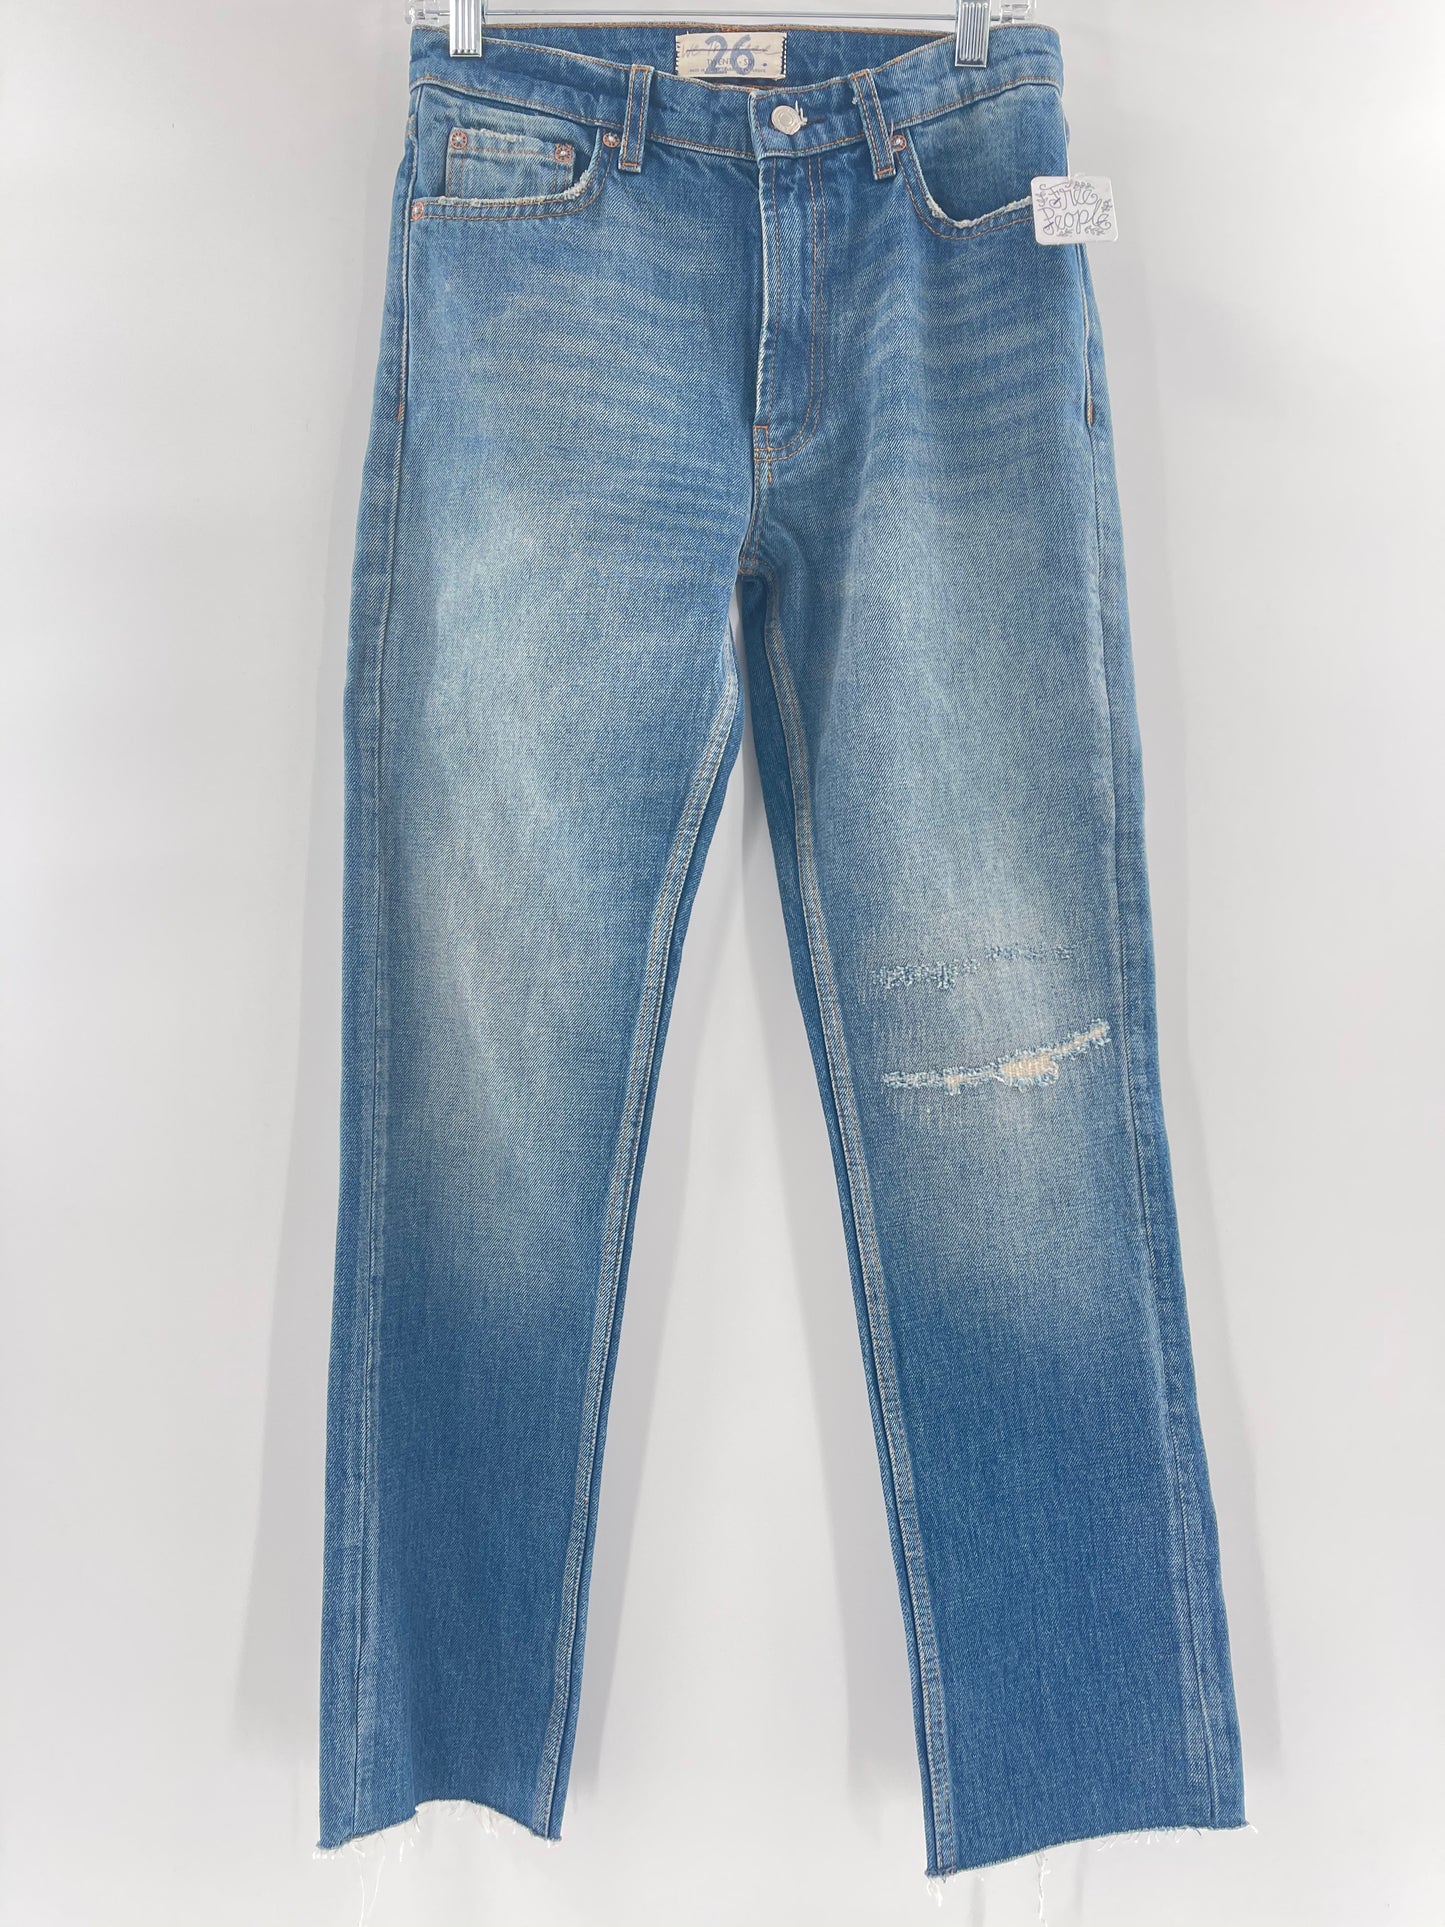 Free People Light Wash Ripped Jeans (size 26)